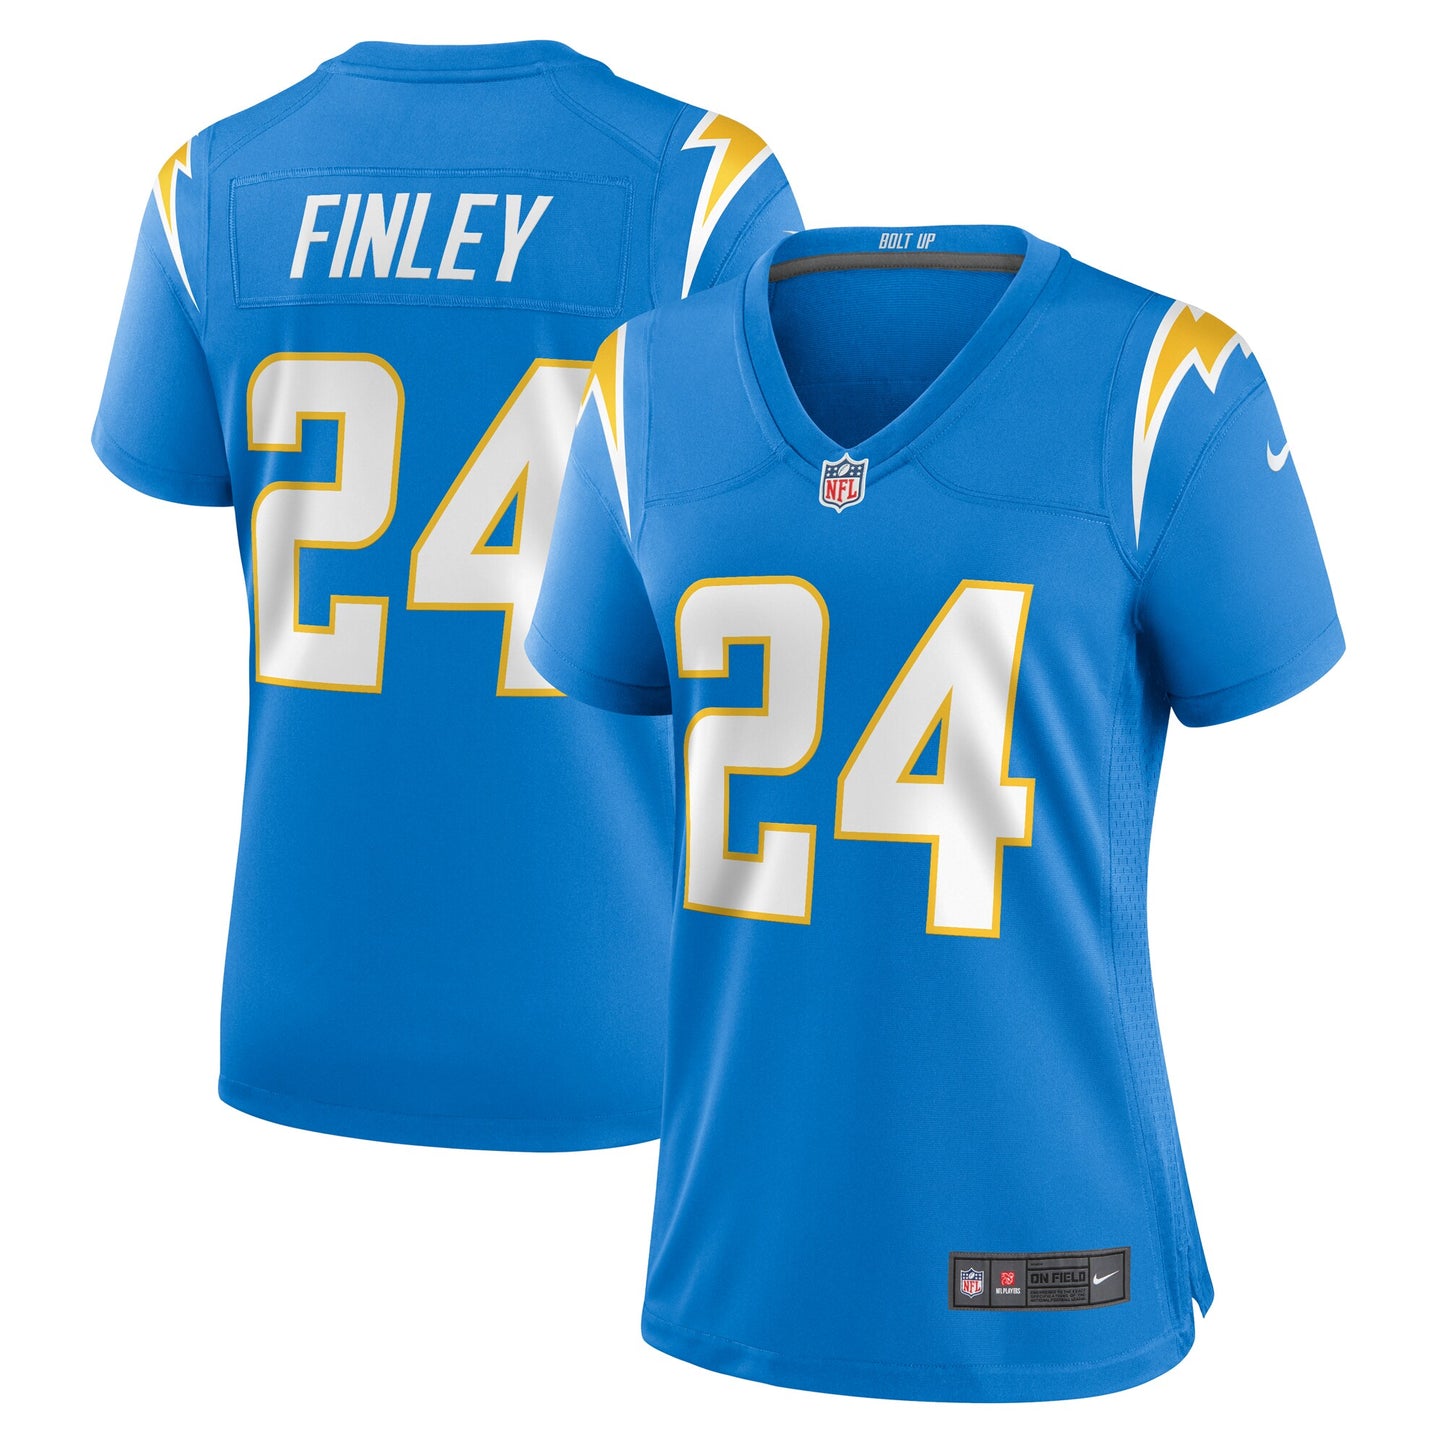 AJ Finley Los Angeles Chargers Nike Women's Team Game Jersey -  Powder Blue